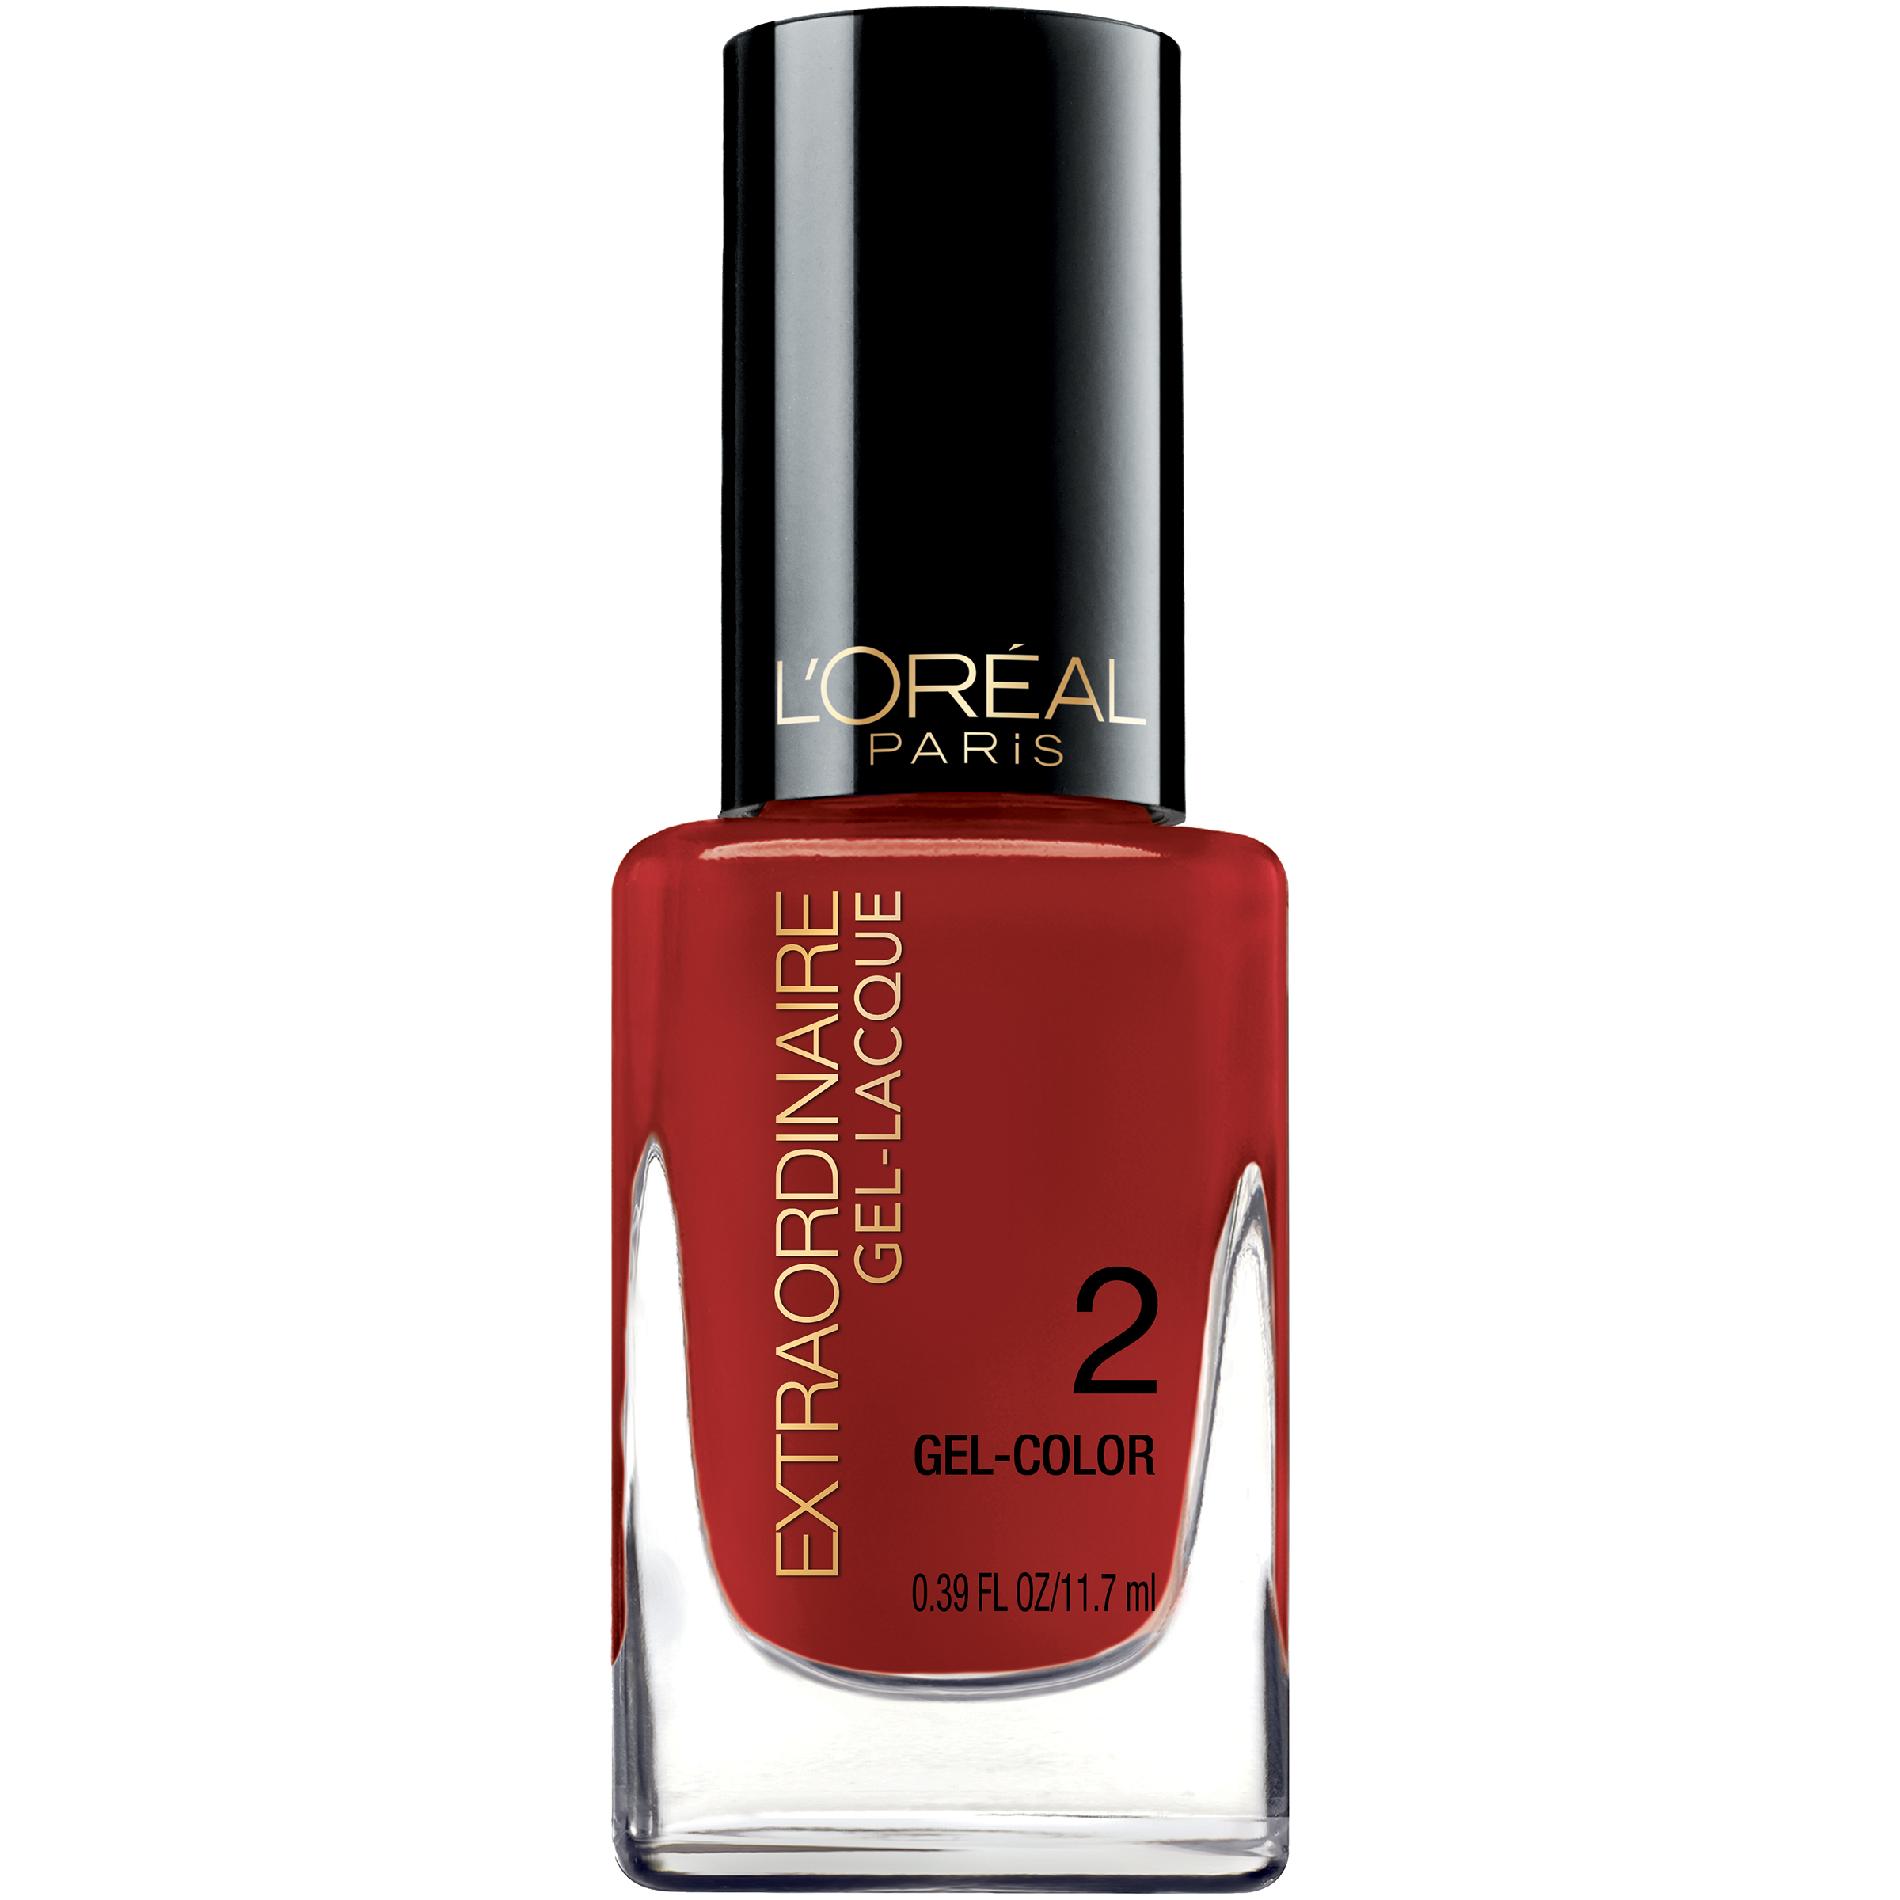 L'Oreal Gel-Lacque 1-2-3 Gel-Color, 712 Lacque-Red